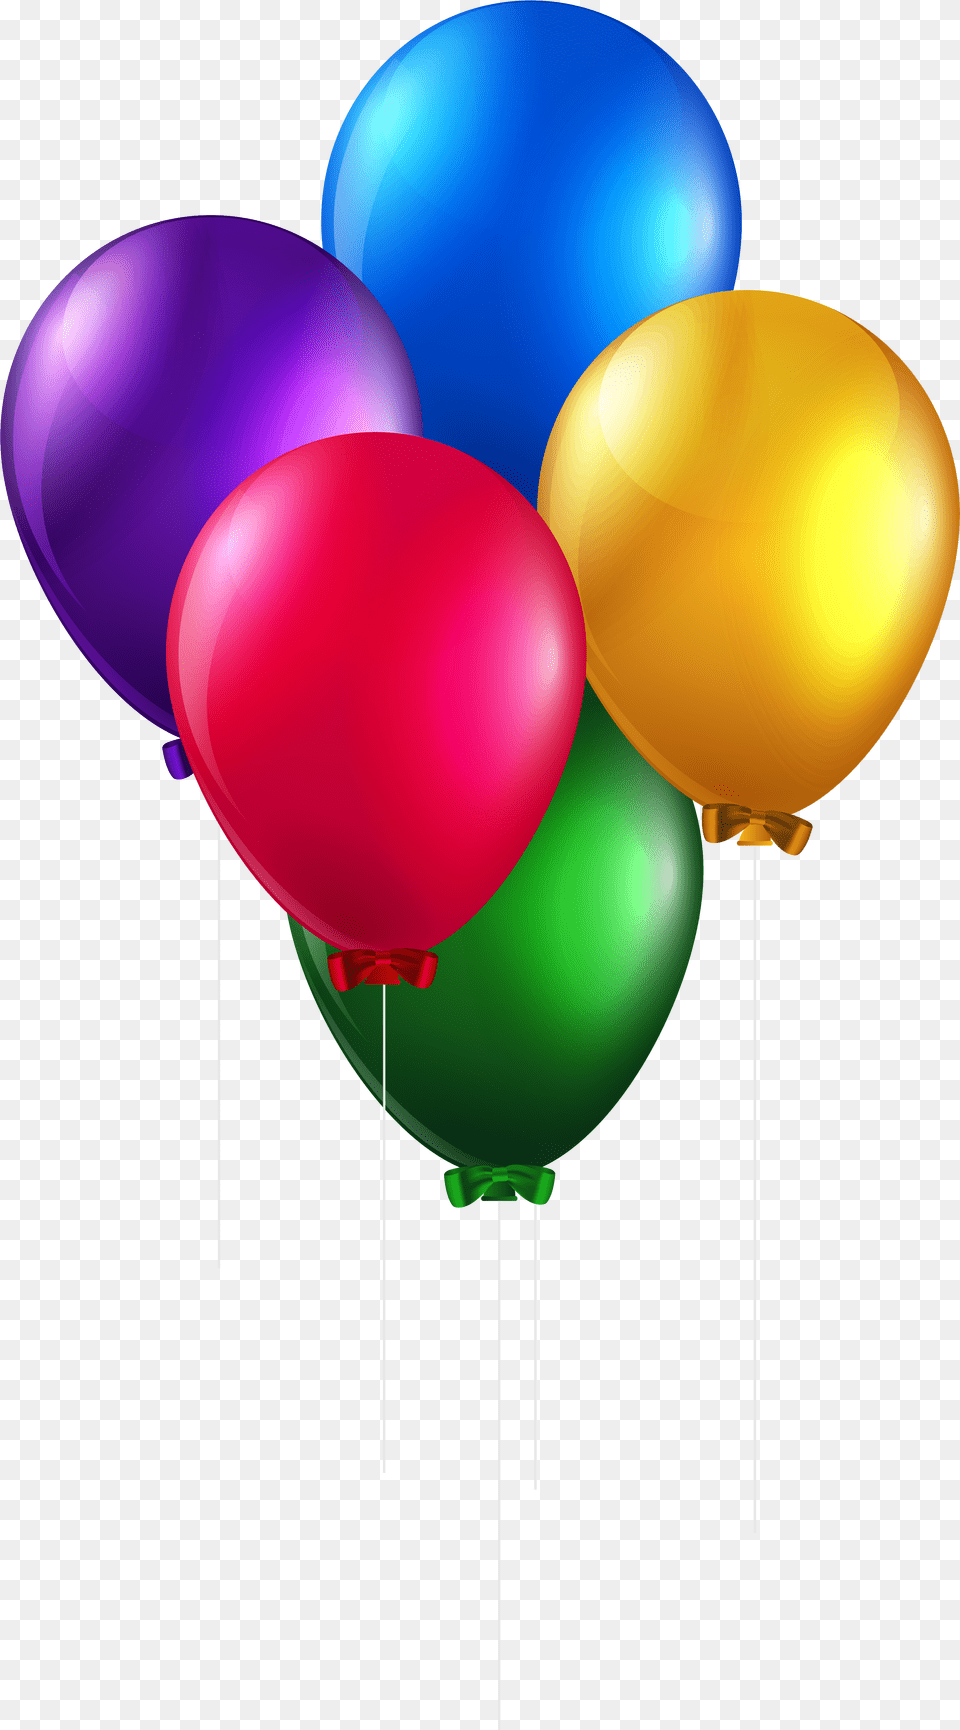 Balloon Clipart Colorful Balloon Background Balloon Clipart Free Transparent Png